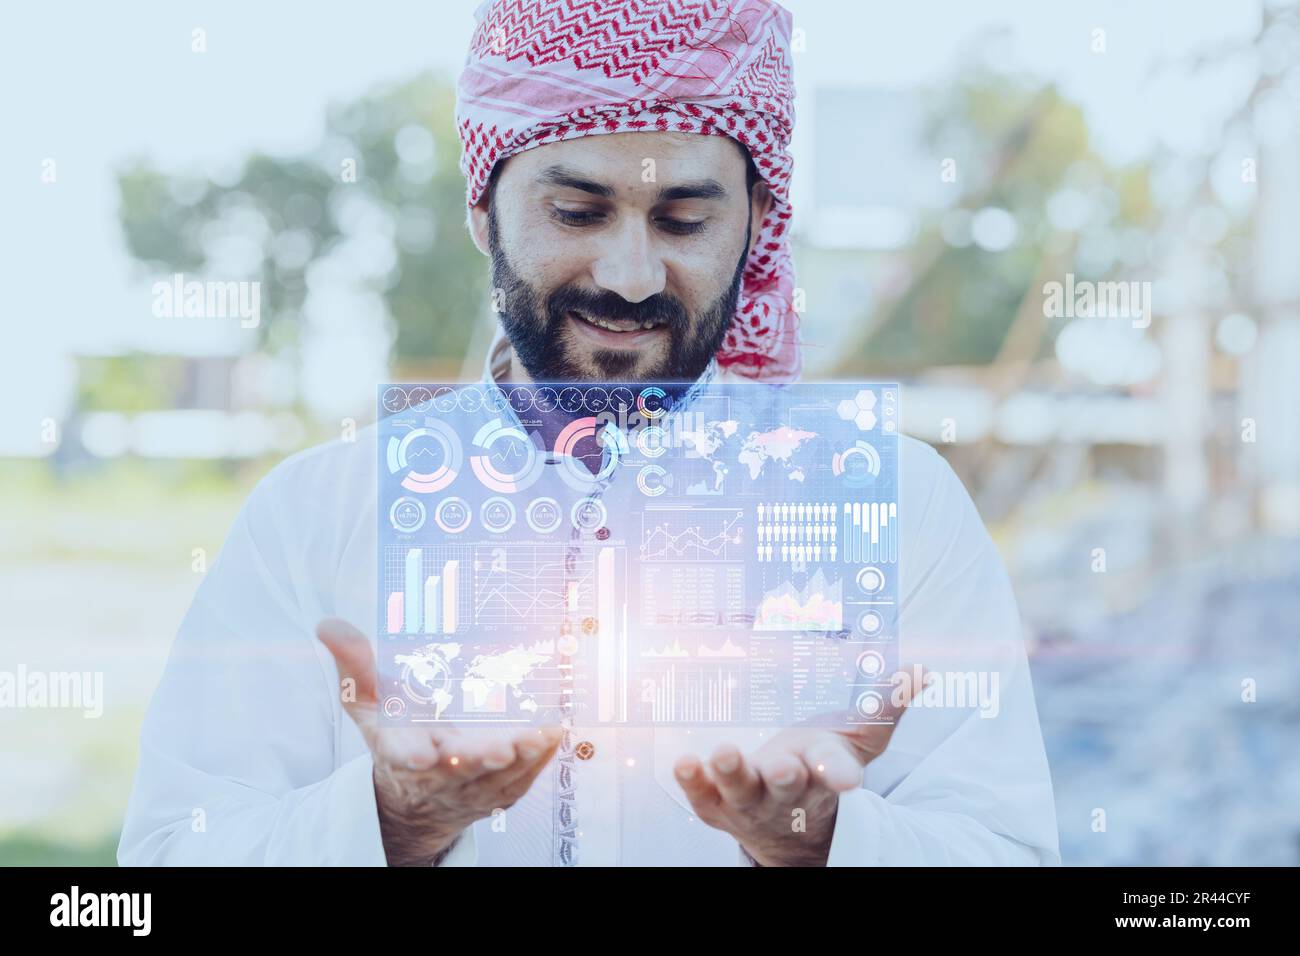 Arab businessman asset investor looking at overlay business information statistic ananlysis data bring in hand palm Stock Photo